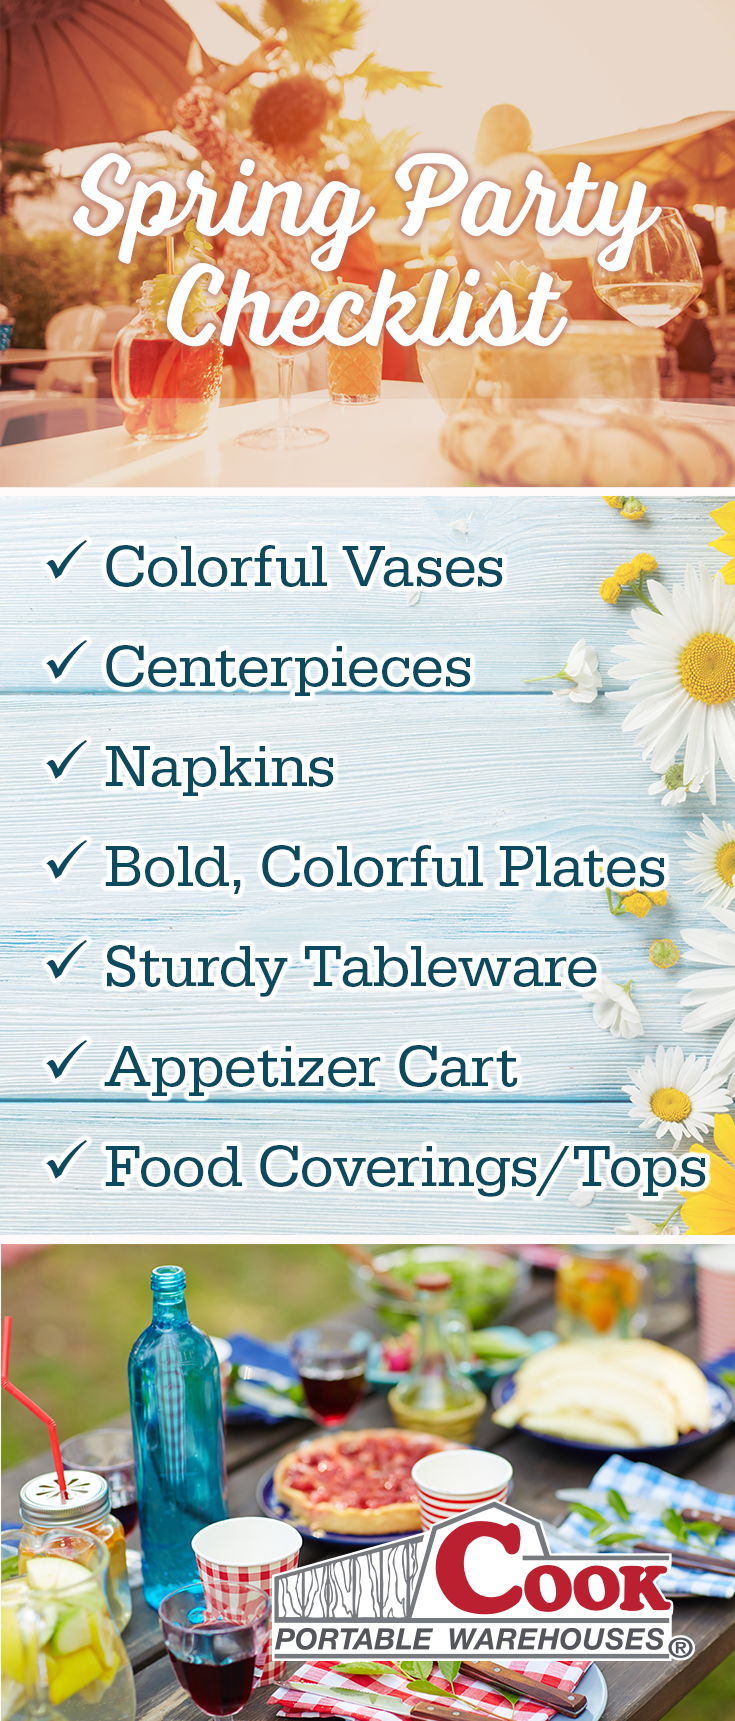 Spring Party Checklist from Cook Portable Warehouses